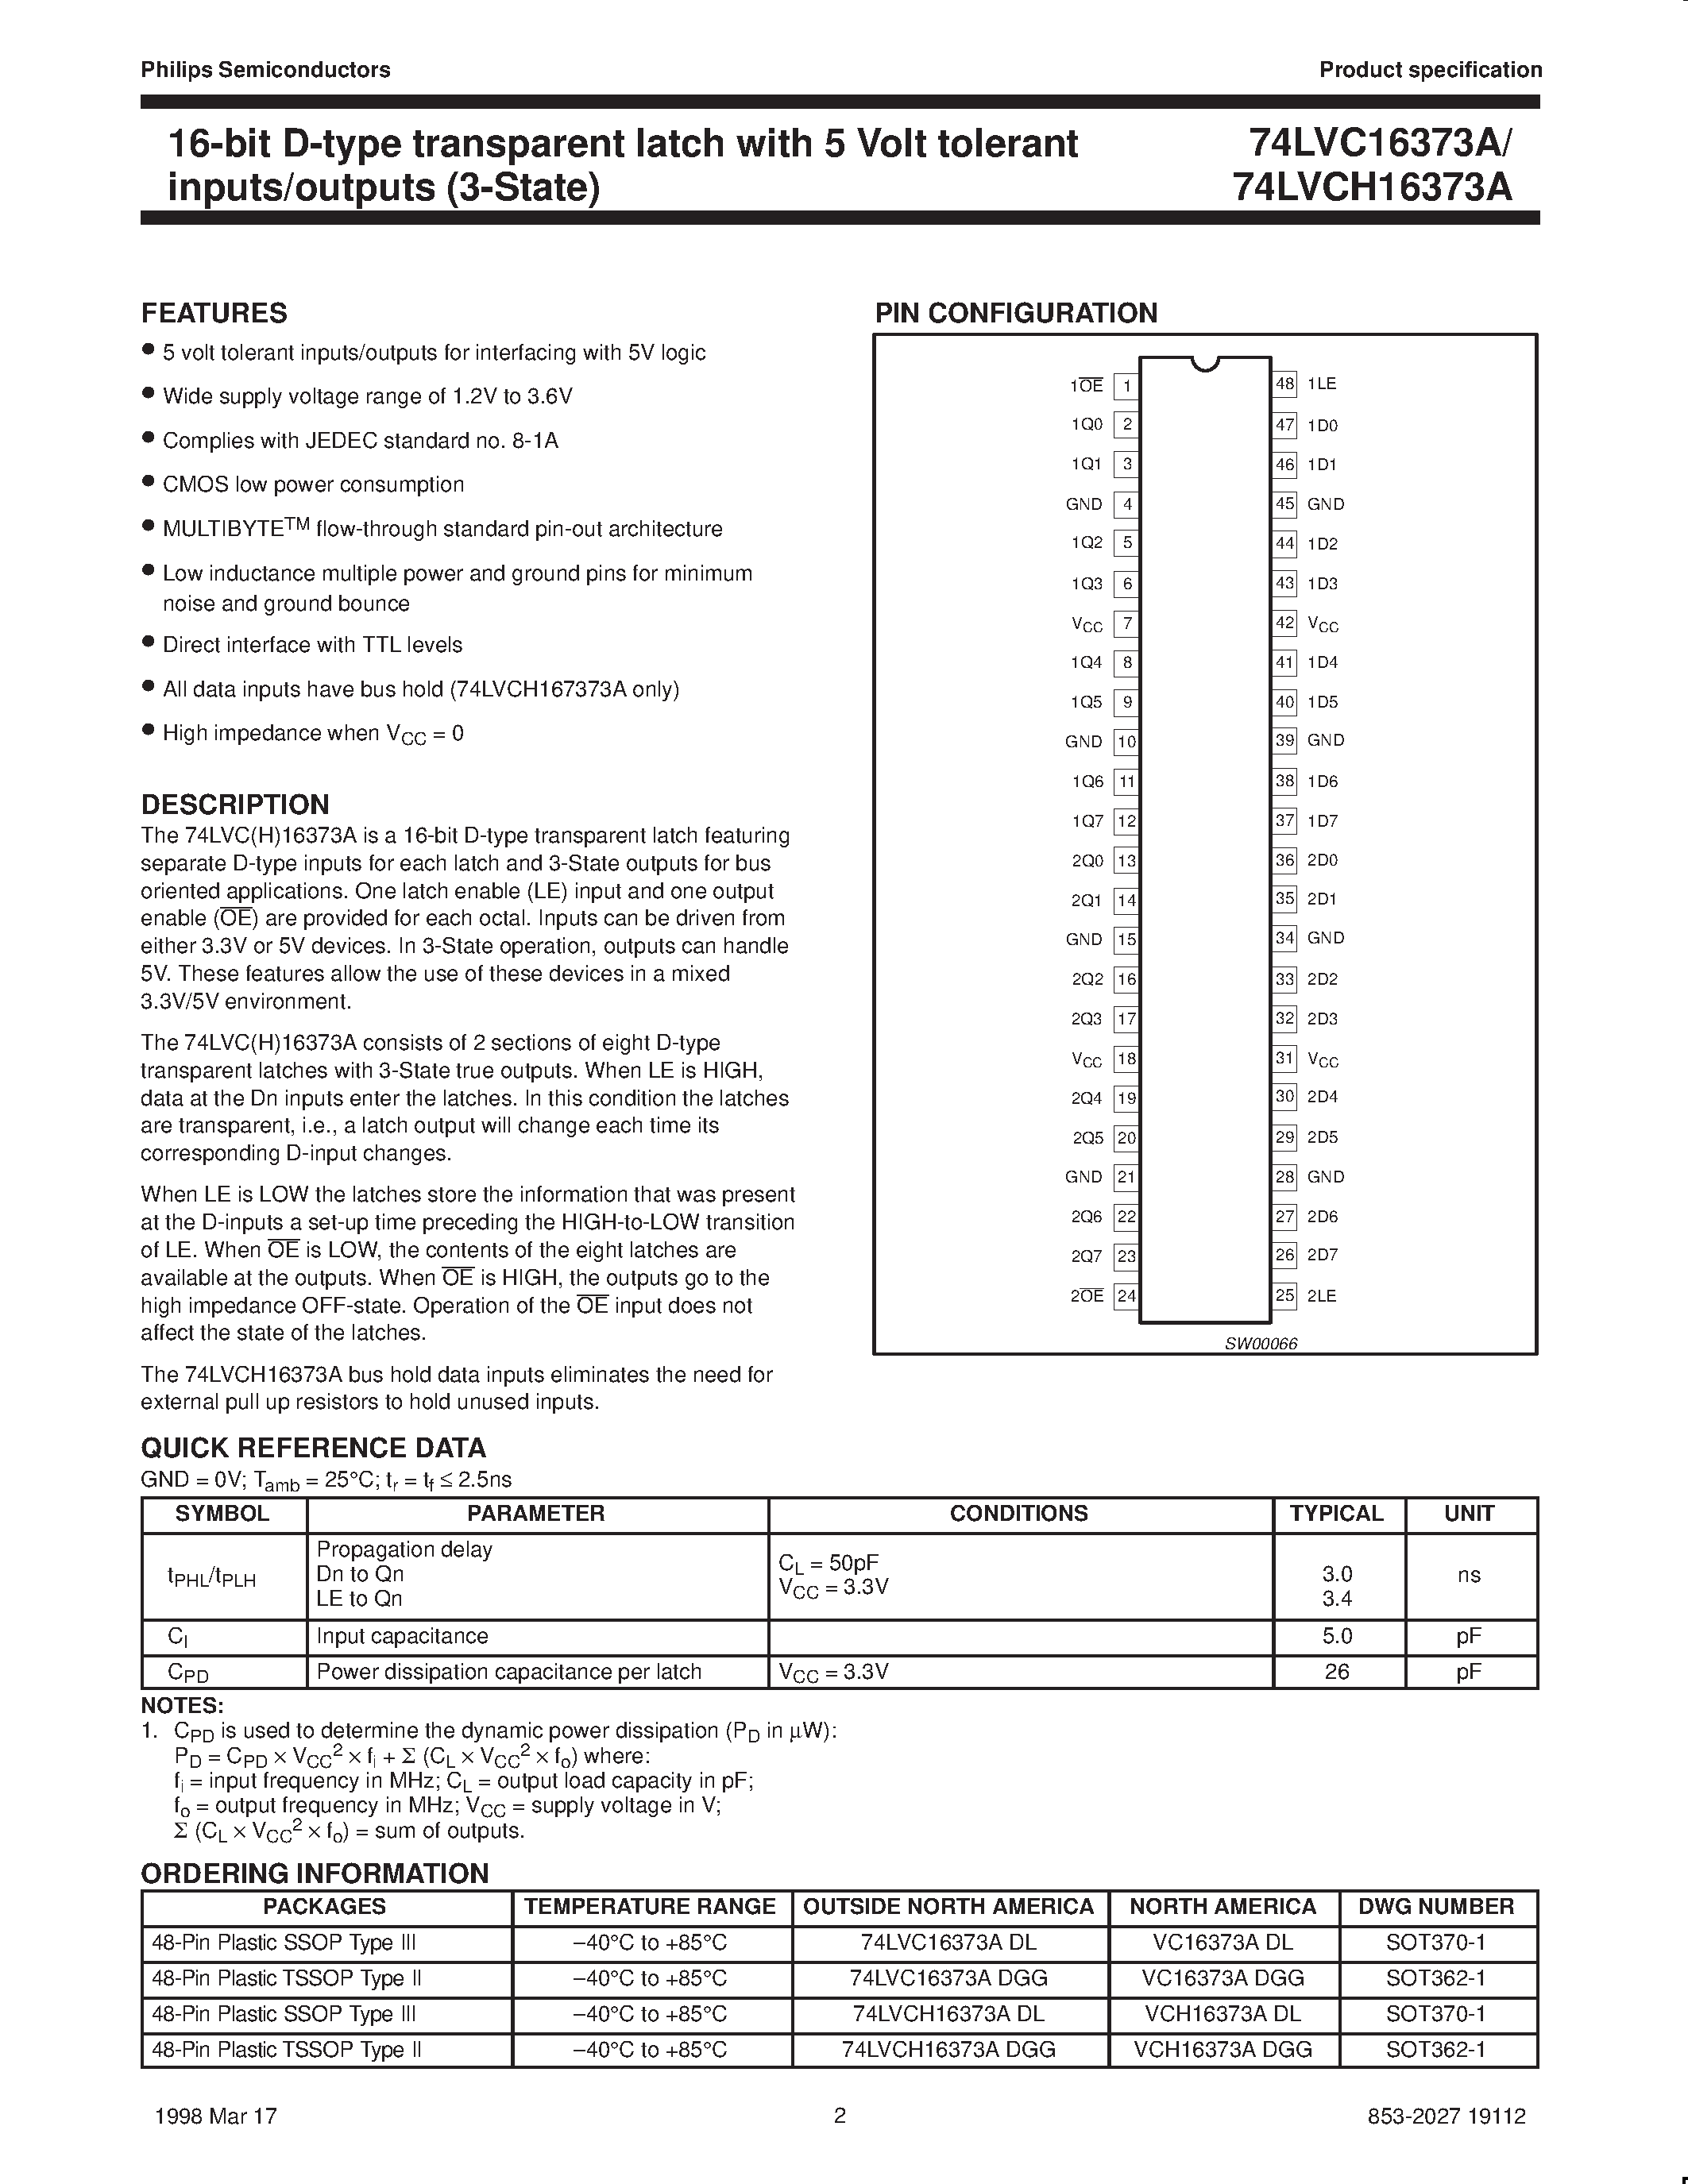 Datasheet VC16373ADL - 16-bit D-type transparent latch with 5 Volt tolerant inputs/outputs 3-State page 2